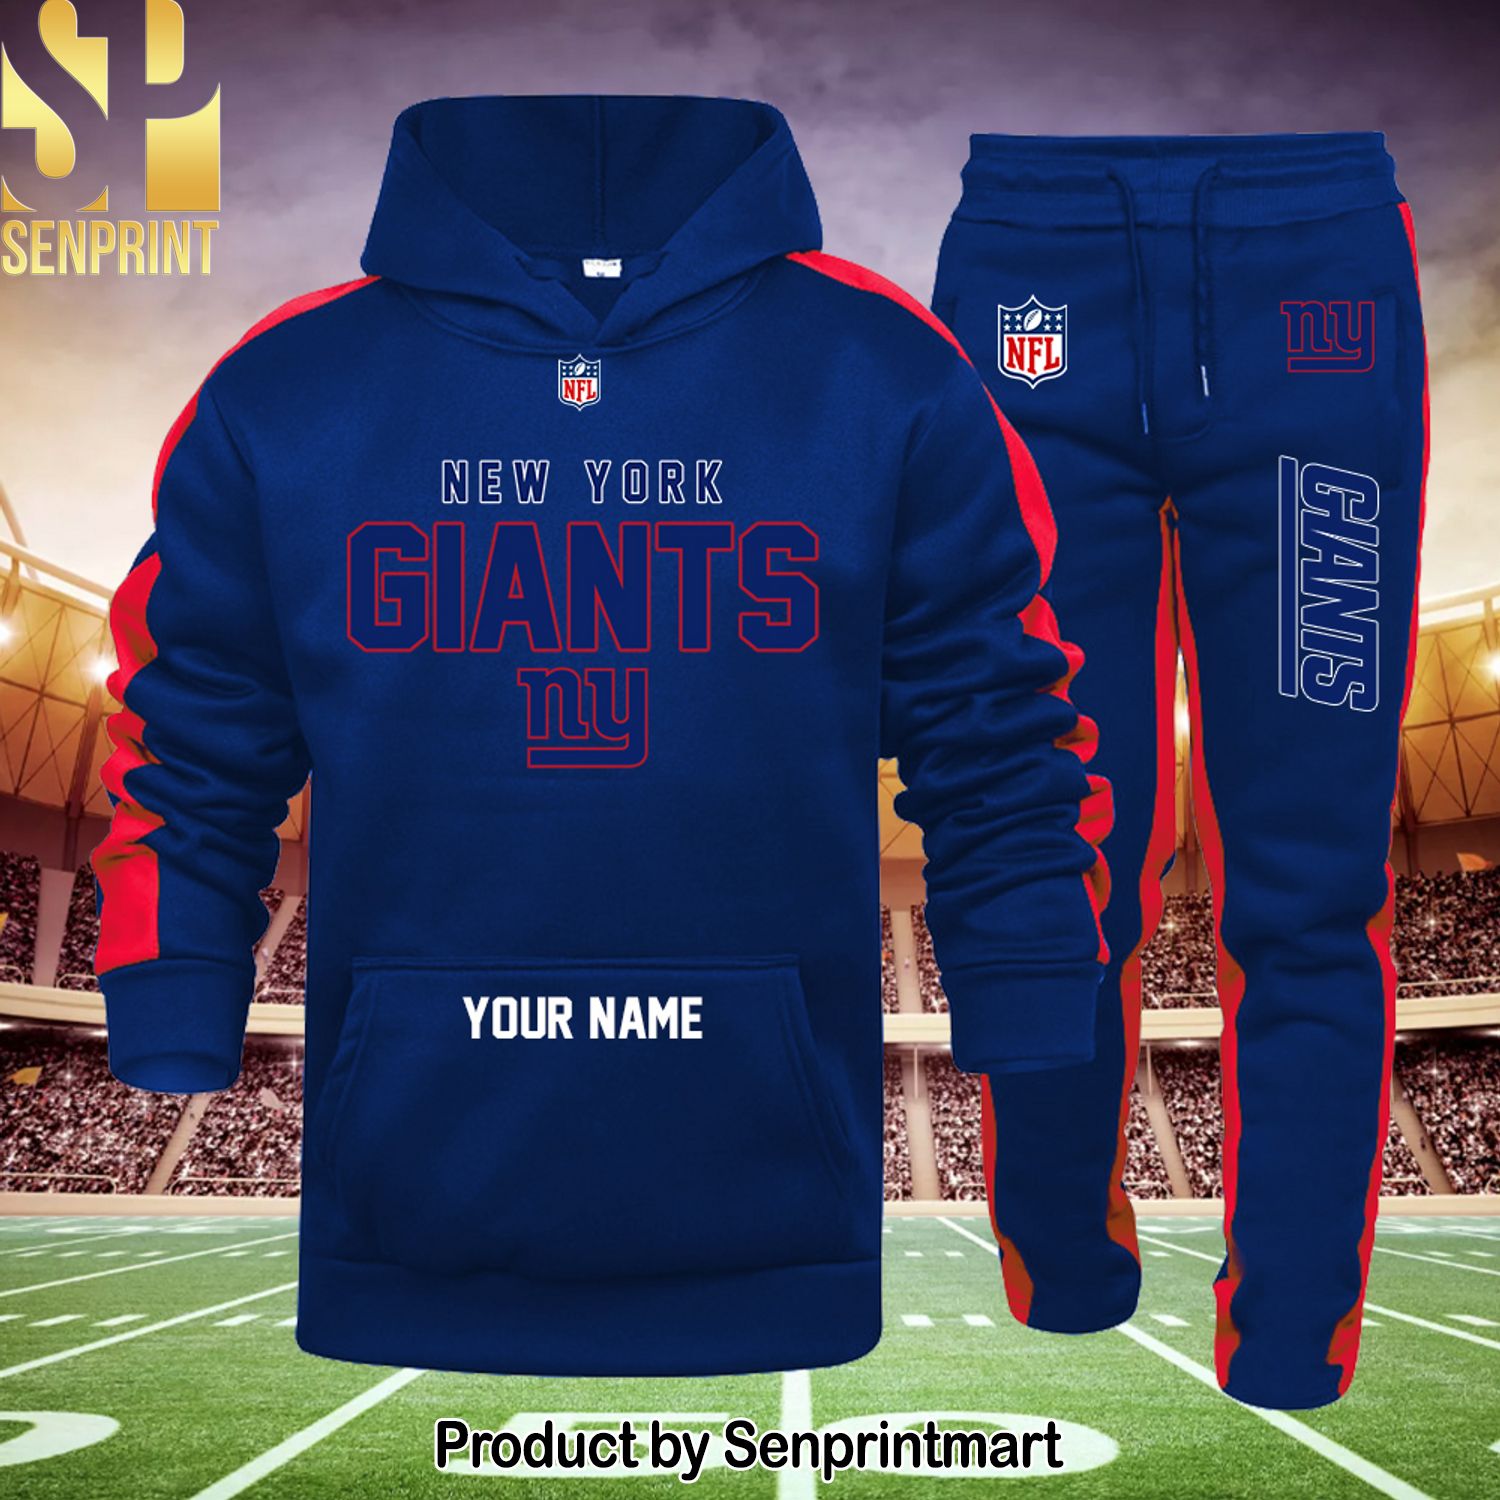 NFL New York Giants Unisex All Over Printed Shirt and Sweatpants